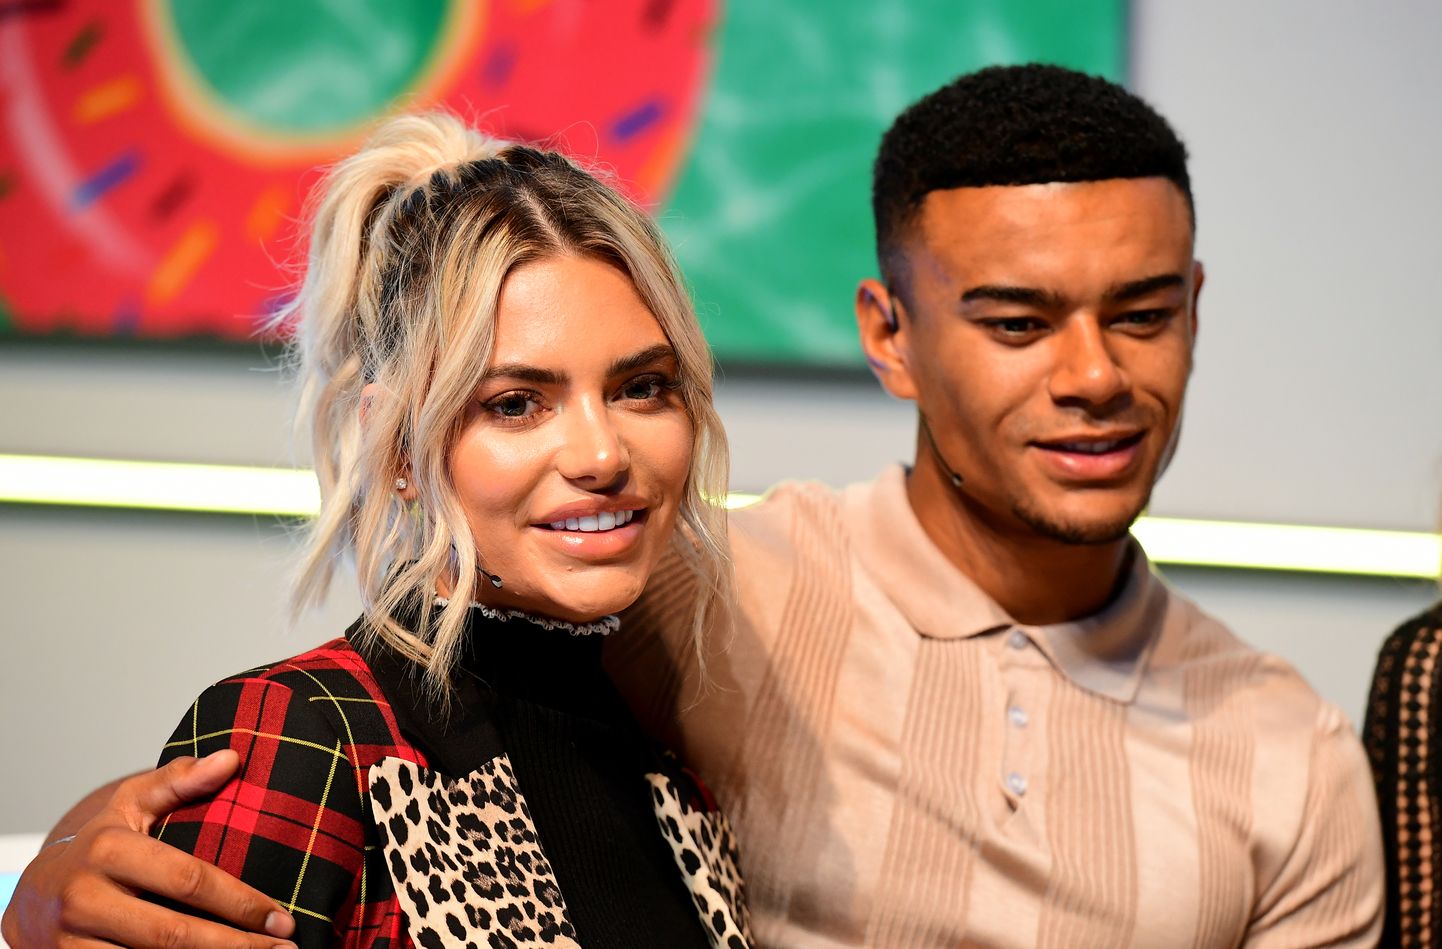 Wes Nelson (right) and Megan Barton Hanson (left) attending the Love Island Live photocall at the ExCel, London.